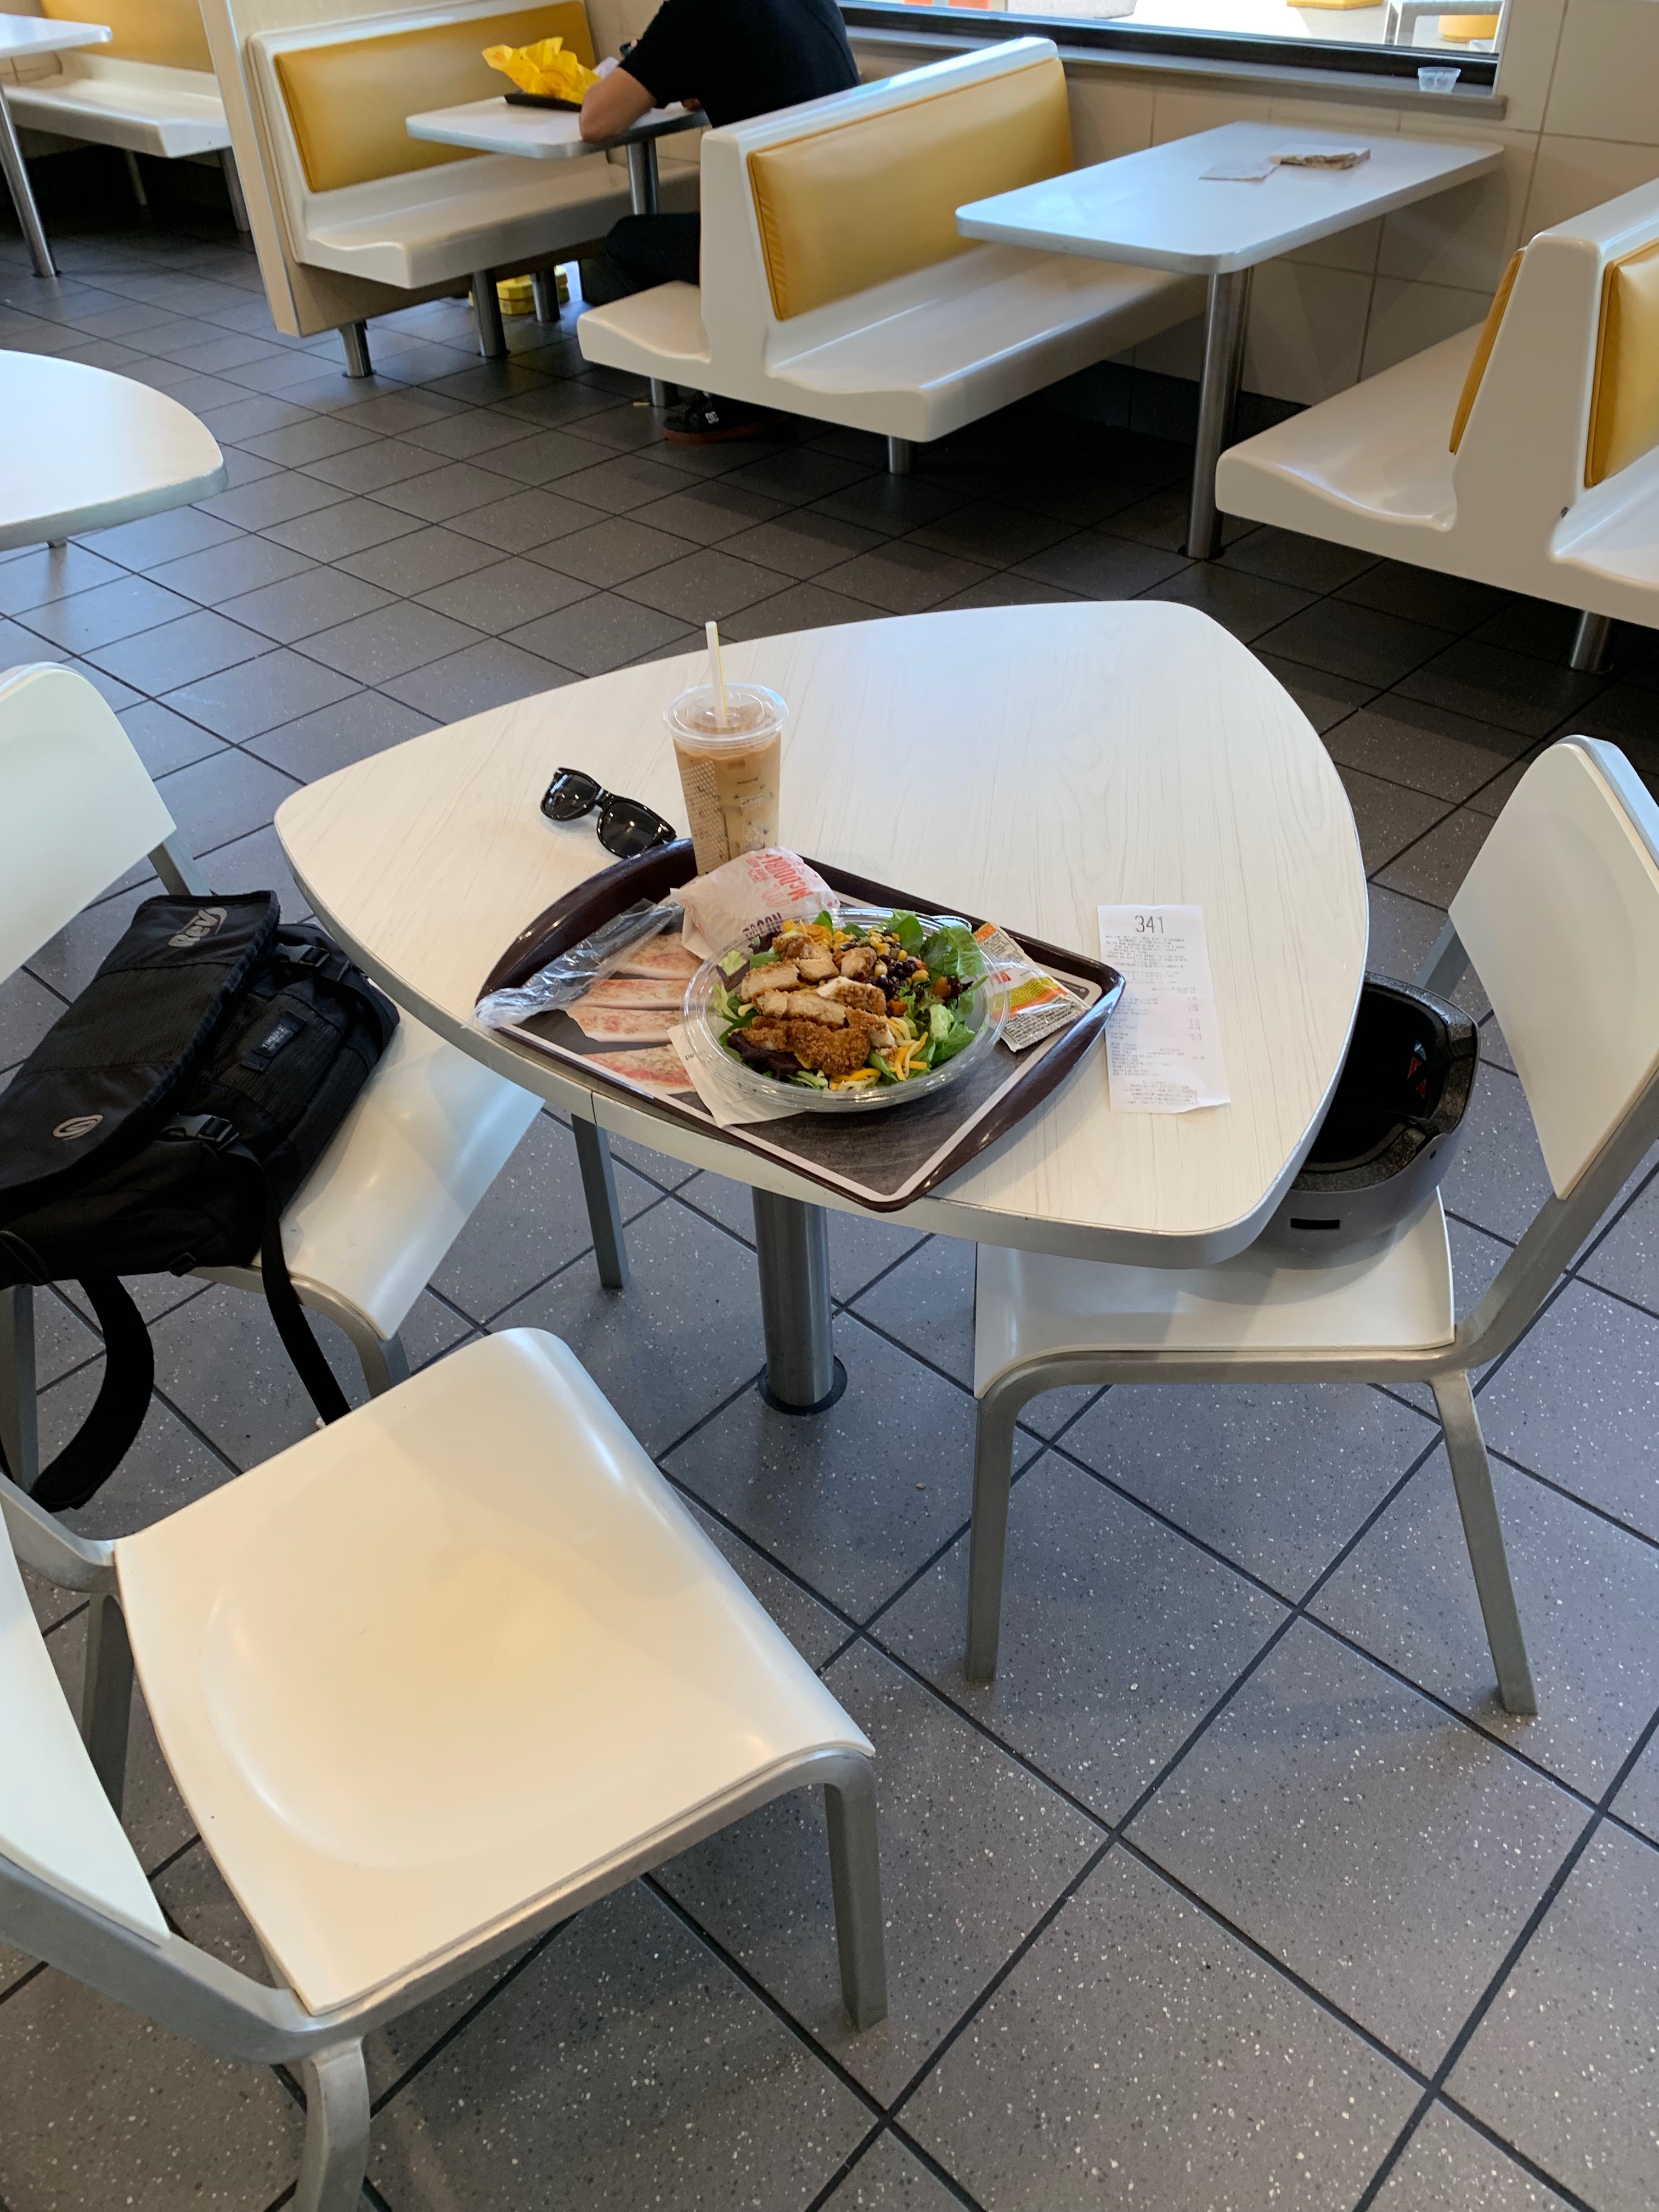 Tray of food next to computer bag